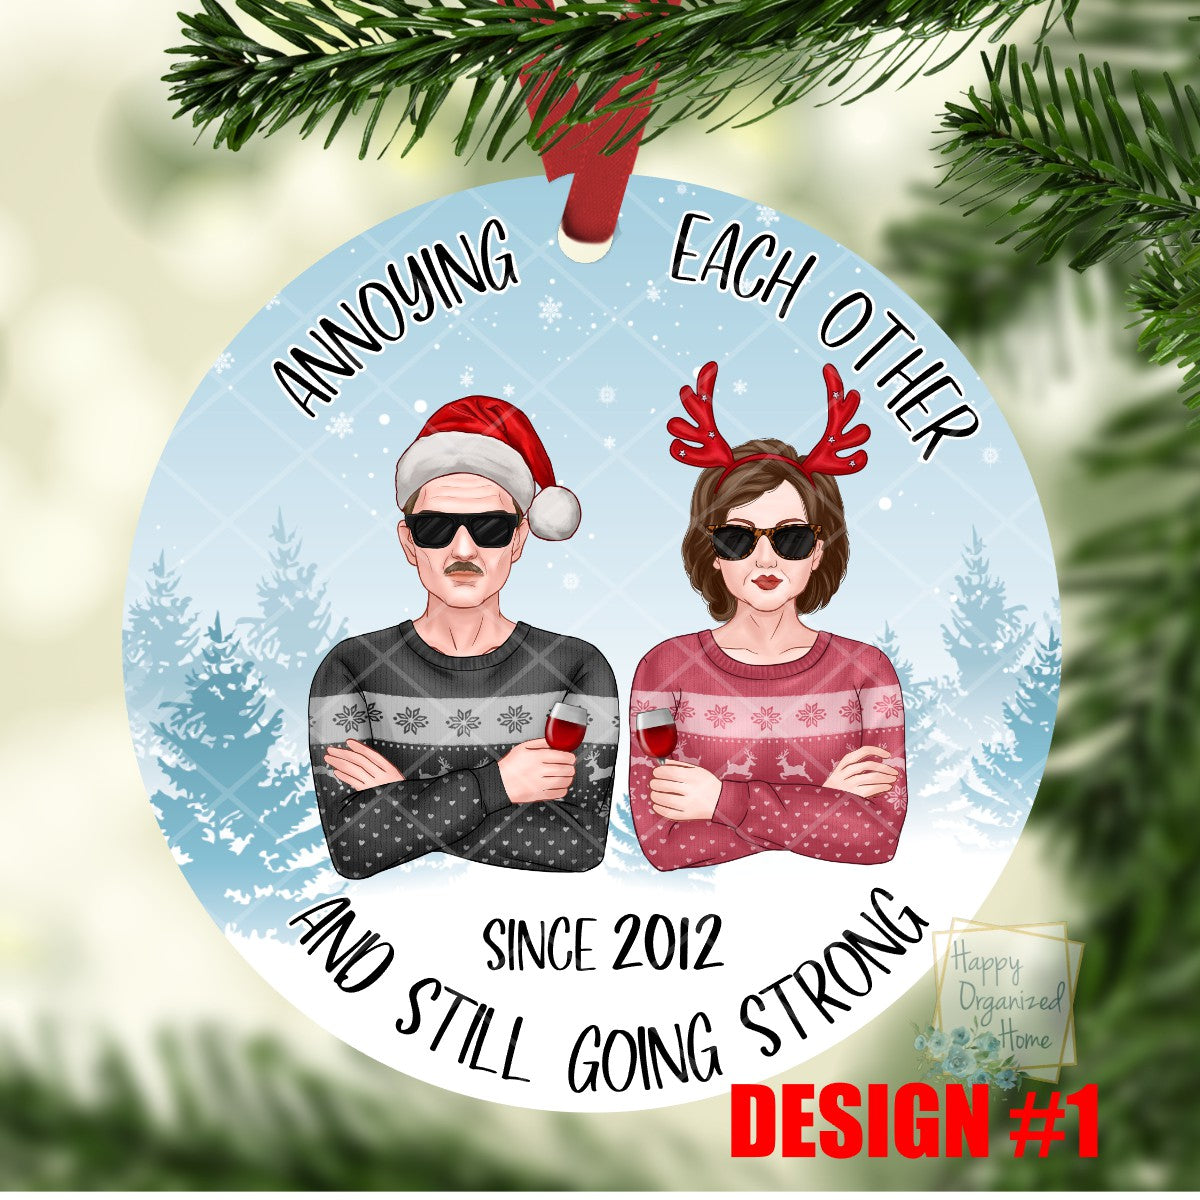 Annoying each other Christmas Couples Ornament Personalized - Christmas Ornament